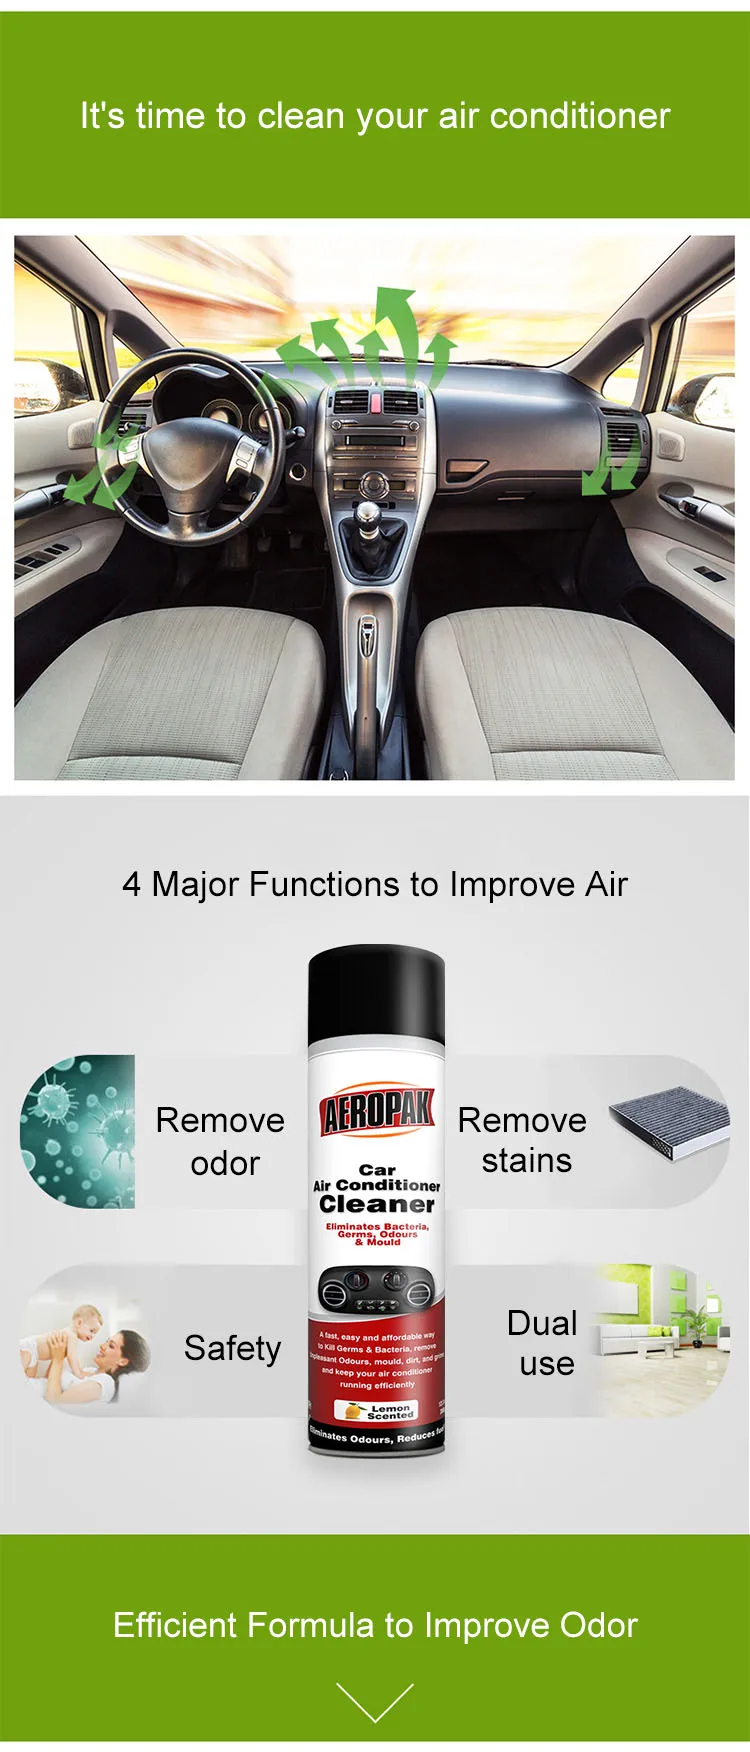 AEROPAK quick clean car Air Conditioner Cleaner with the lowest pricer